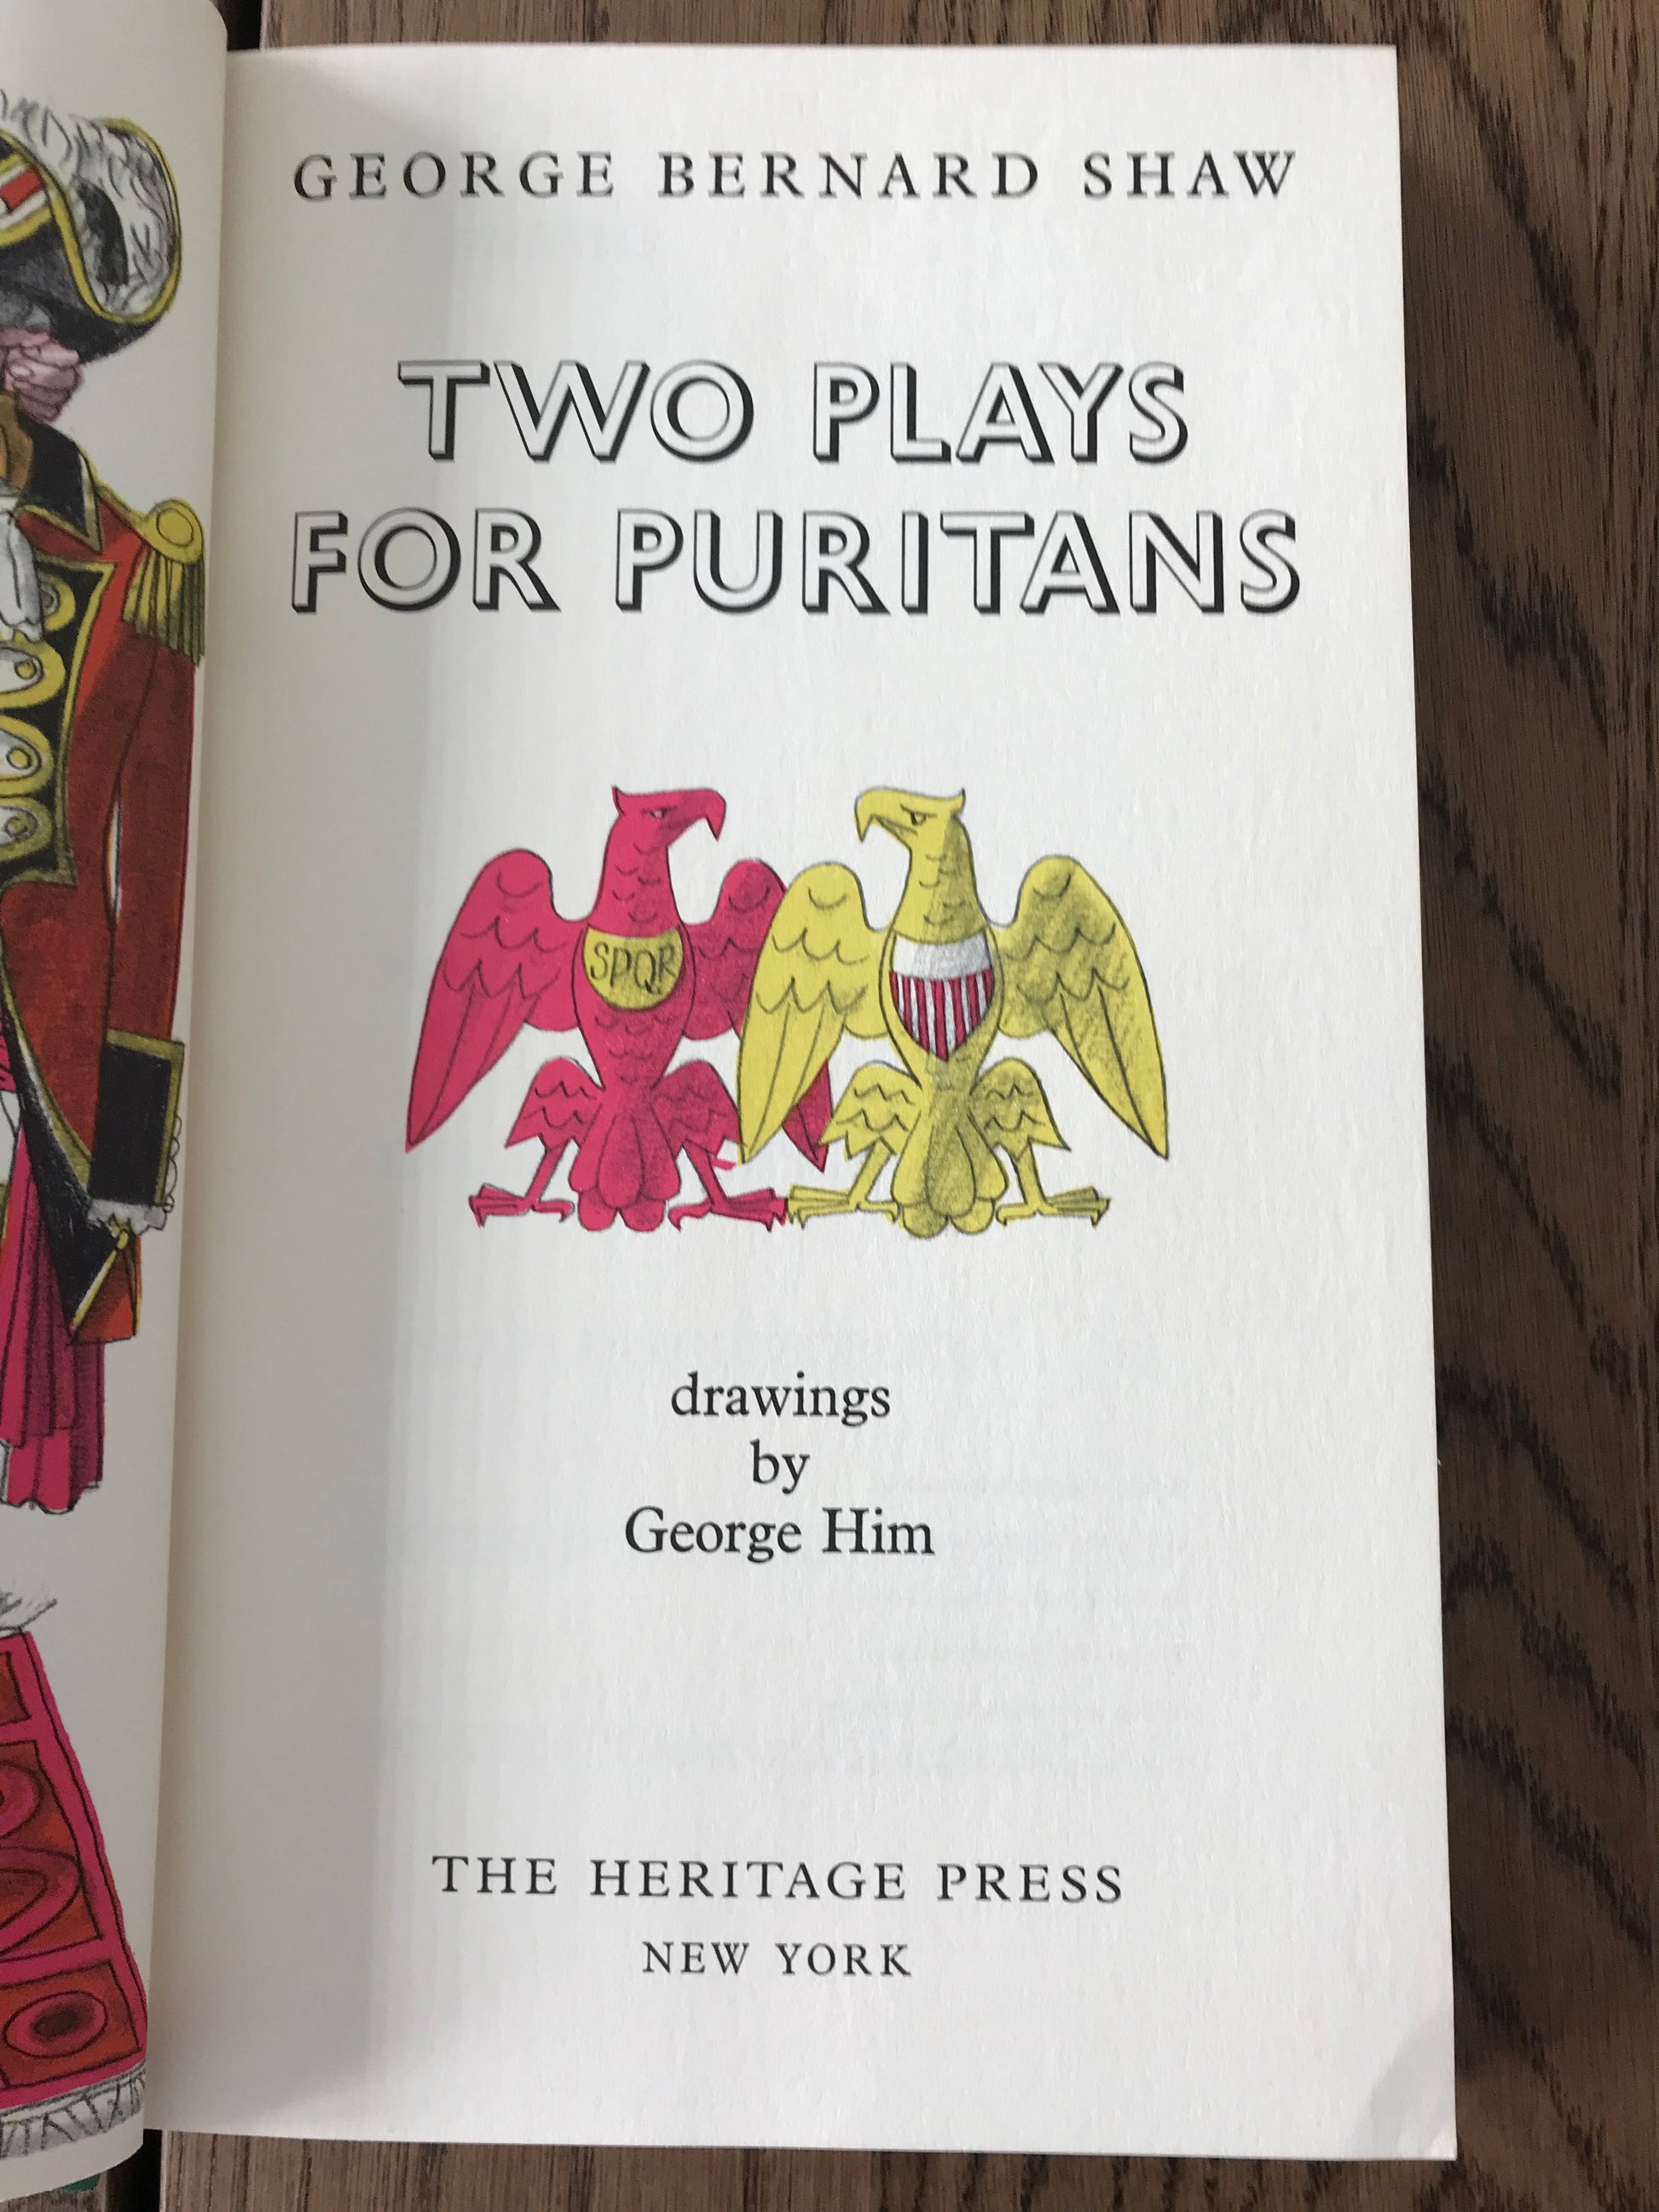 TWO PLAYS FOR PURITANS - BY GEORGE BERNARD SHAW BooksCardsNBikes